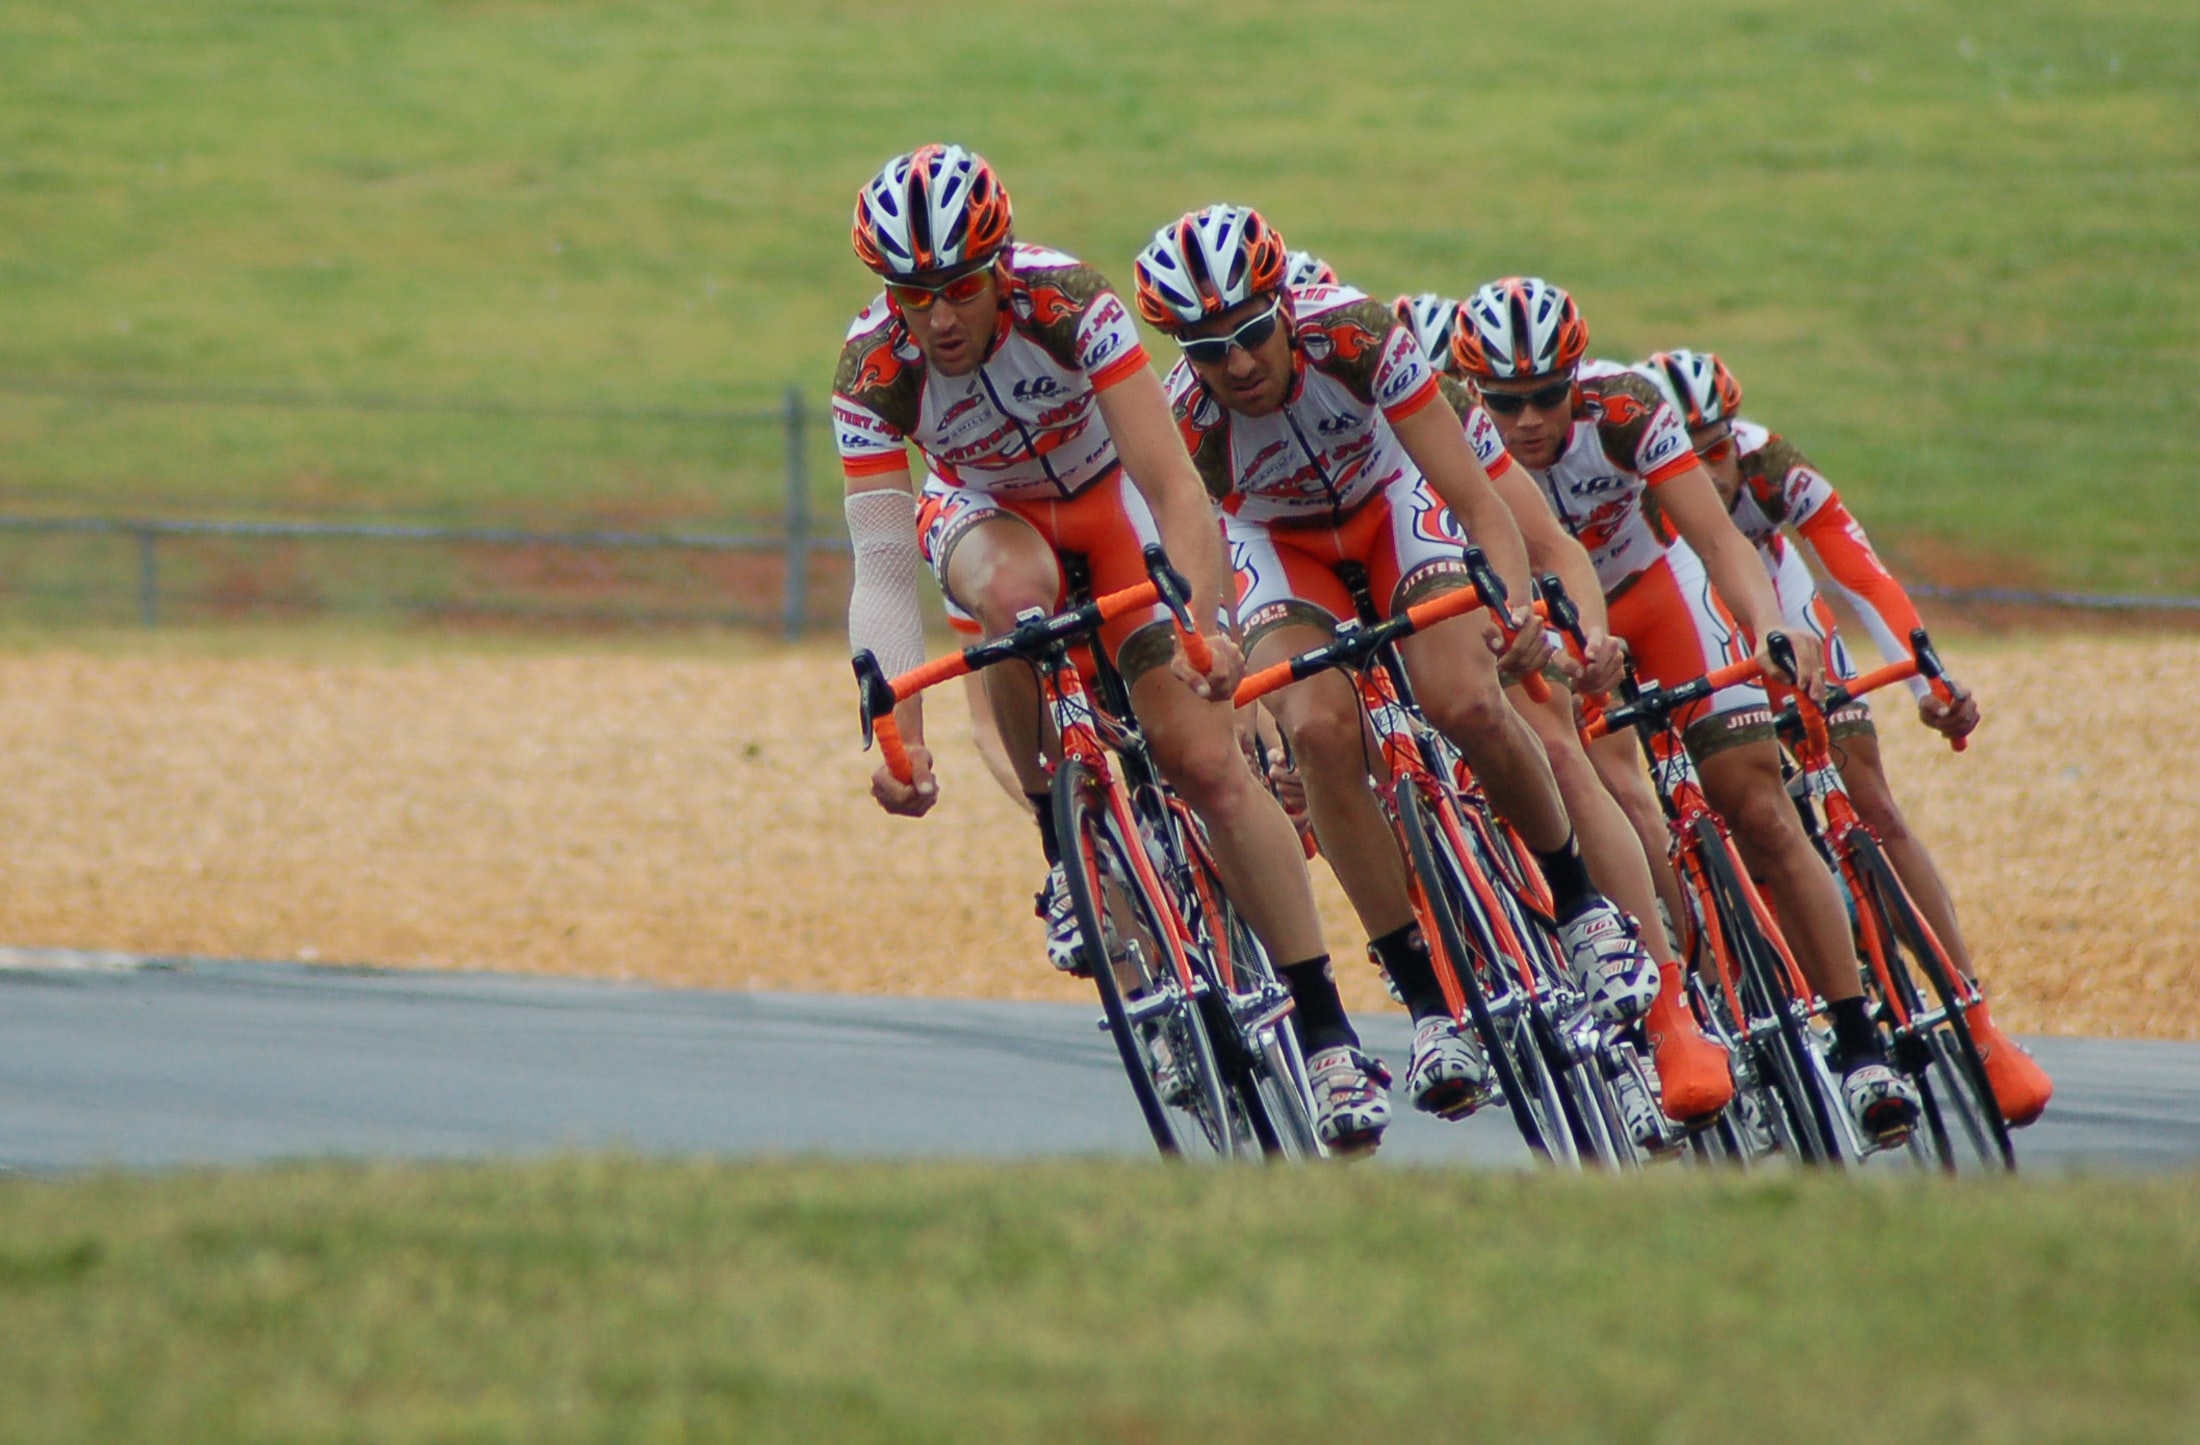 A group of cyclists in professional attire engage in a road race